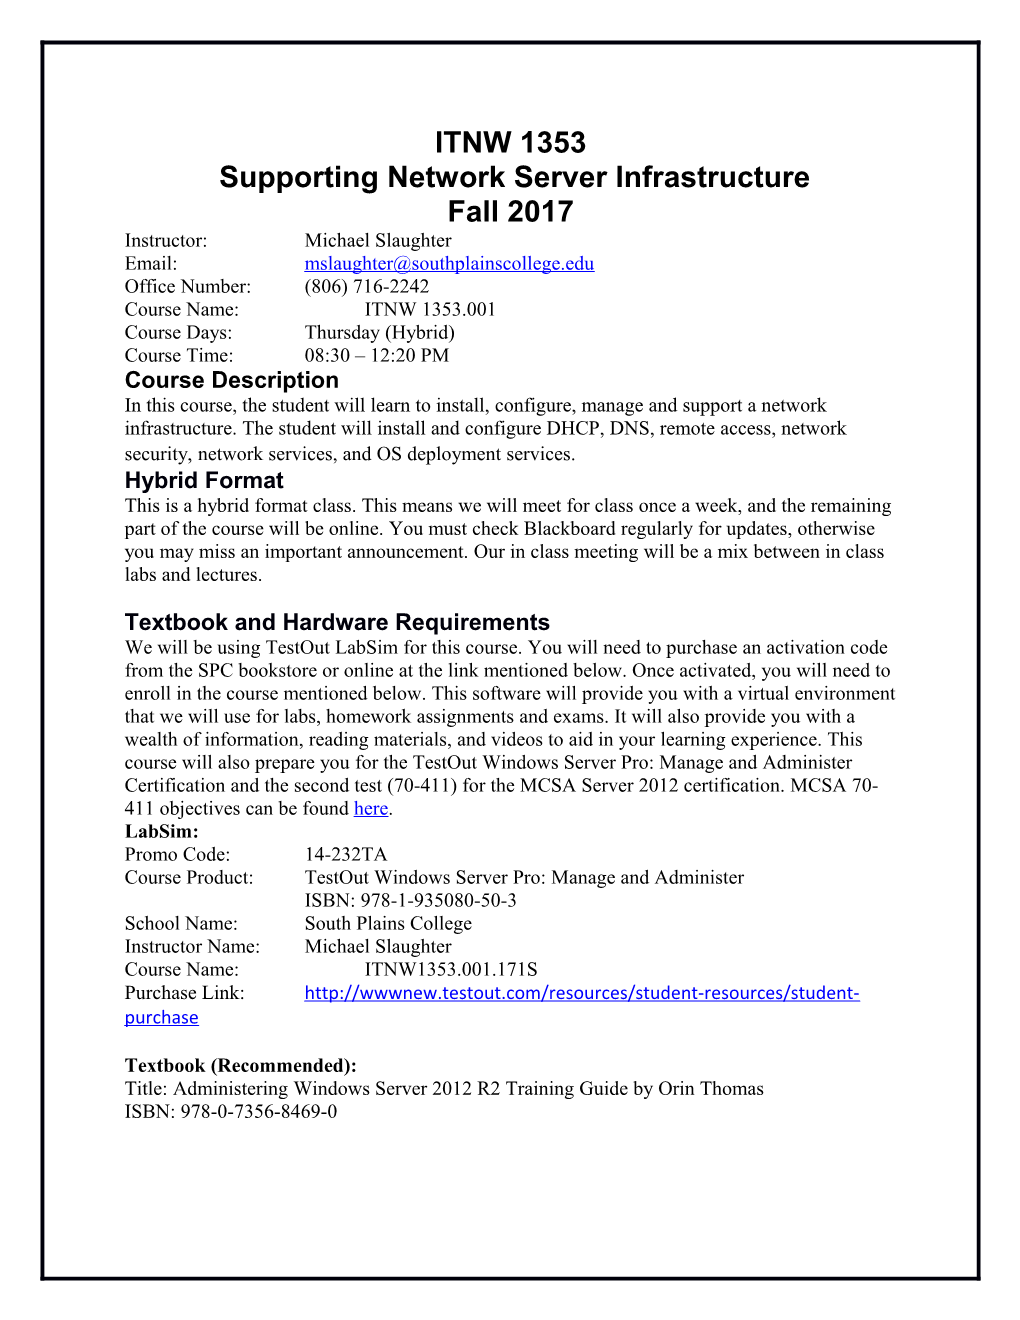 ITNW 1353 Supporting Network Server Infrastructure Fall 2017